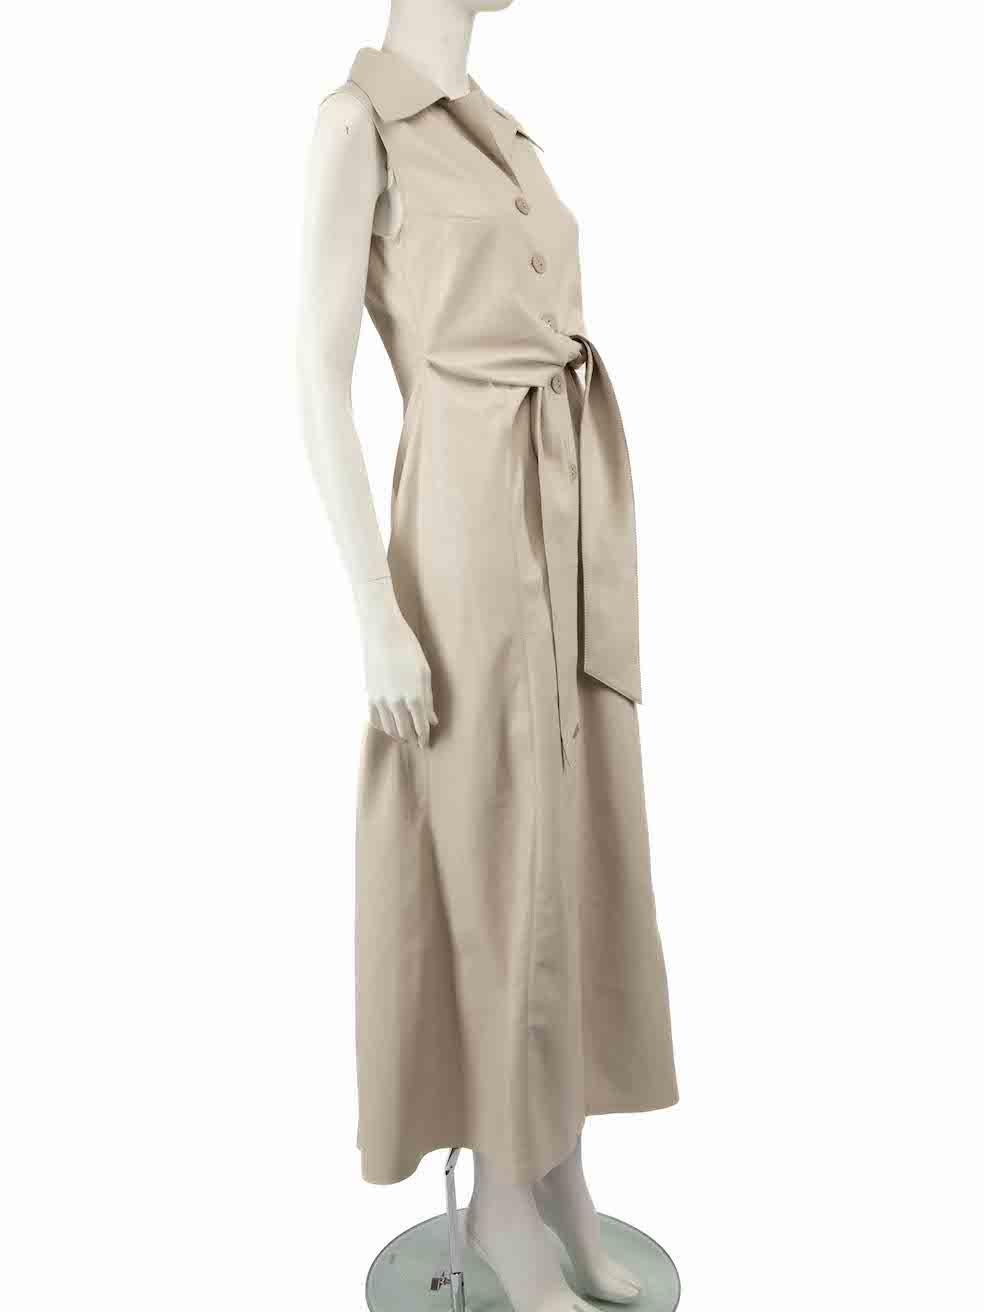 CONDITION is Very good. Hardly any visible wear to dress is evident on this used NANUSHKA designer resale item.
 
 
 
 Details
 
 
 Beige
 
 Vegan leather
 
 Midi dress
 
 Front button up closure
 
 Sleeveless
 
 V neckline
 
 Tie knot belted
 
 
 
